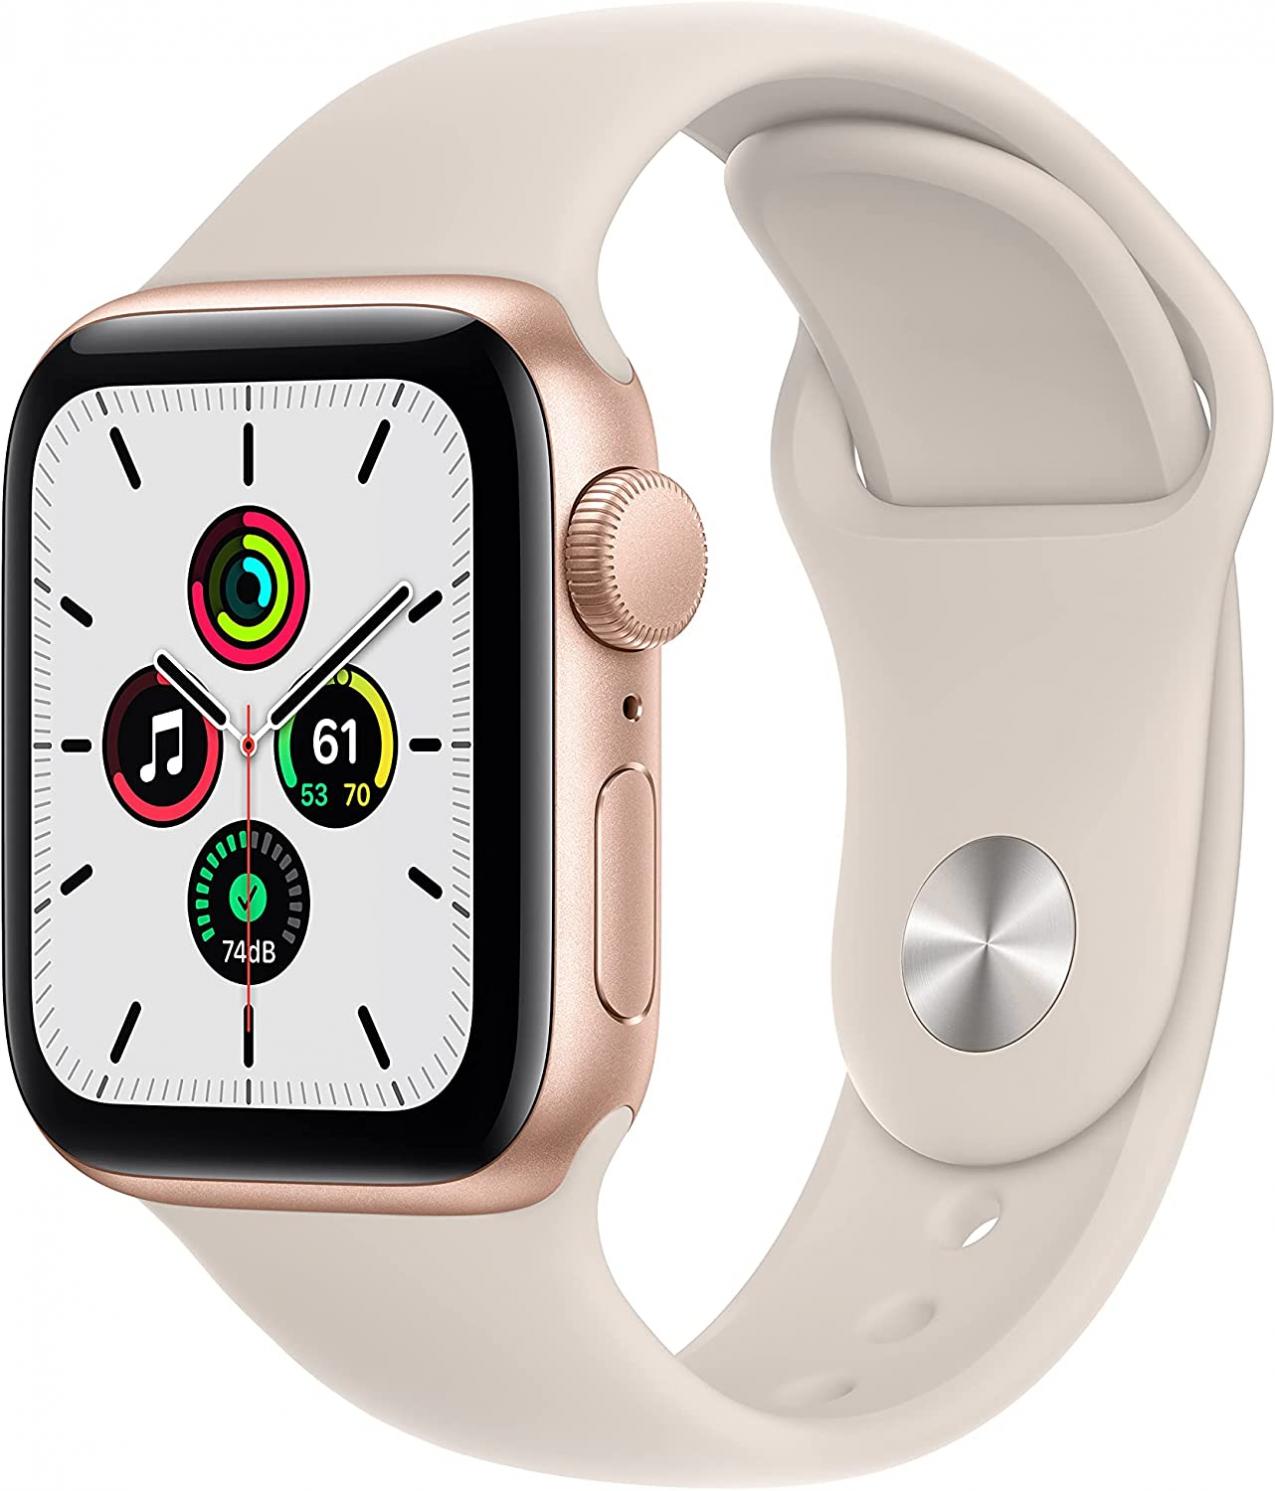 Apple Watch SE [GPS 40mm] Smart Watch w/ Gold Aluminium Case with Starlight Sport Band. Fitness & Activity Tracker, Heart Rate Monitor, Retina Display, Water Resistant